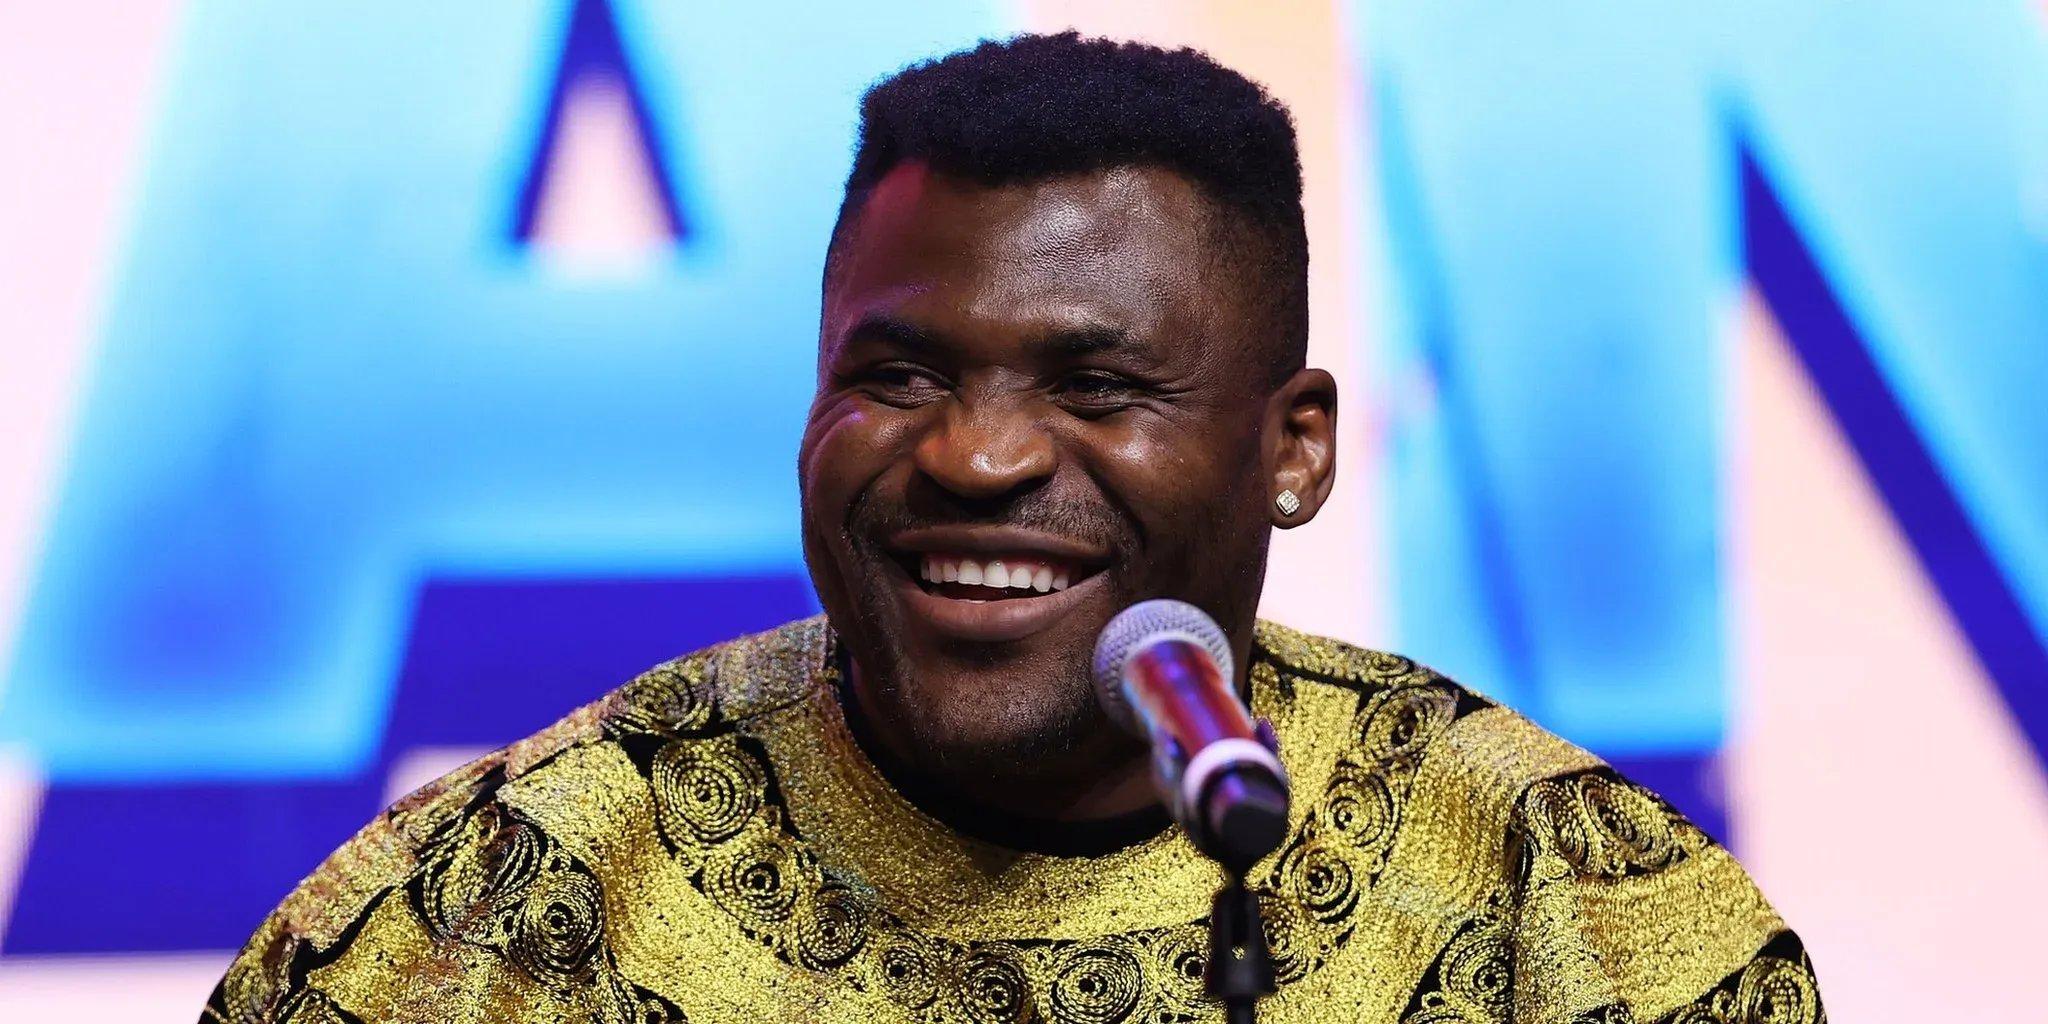 PFL Owner Details Upcoming Pay-Per-View, Including Francis Ngannou's Return